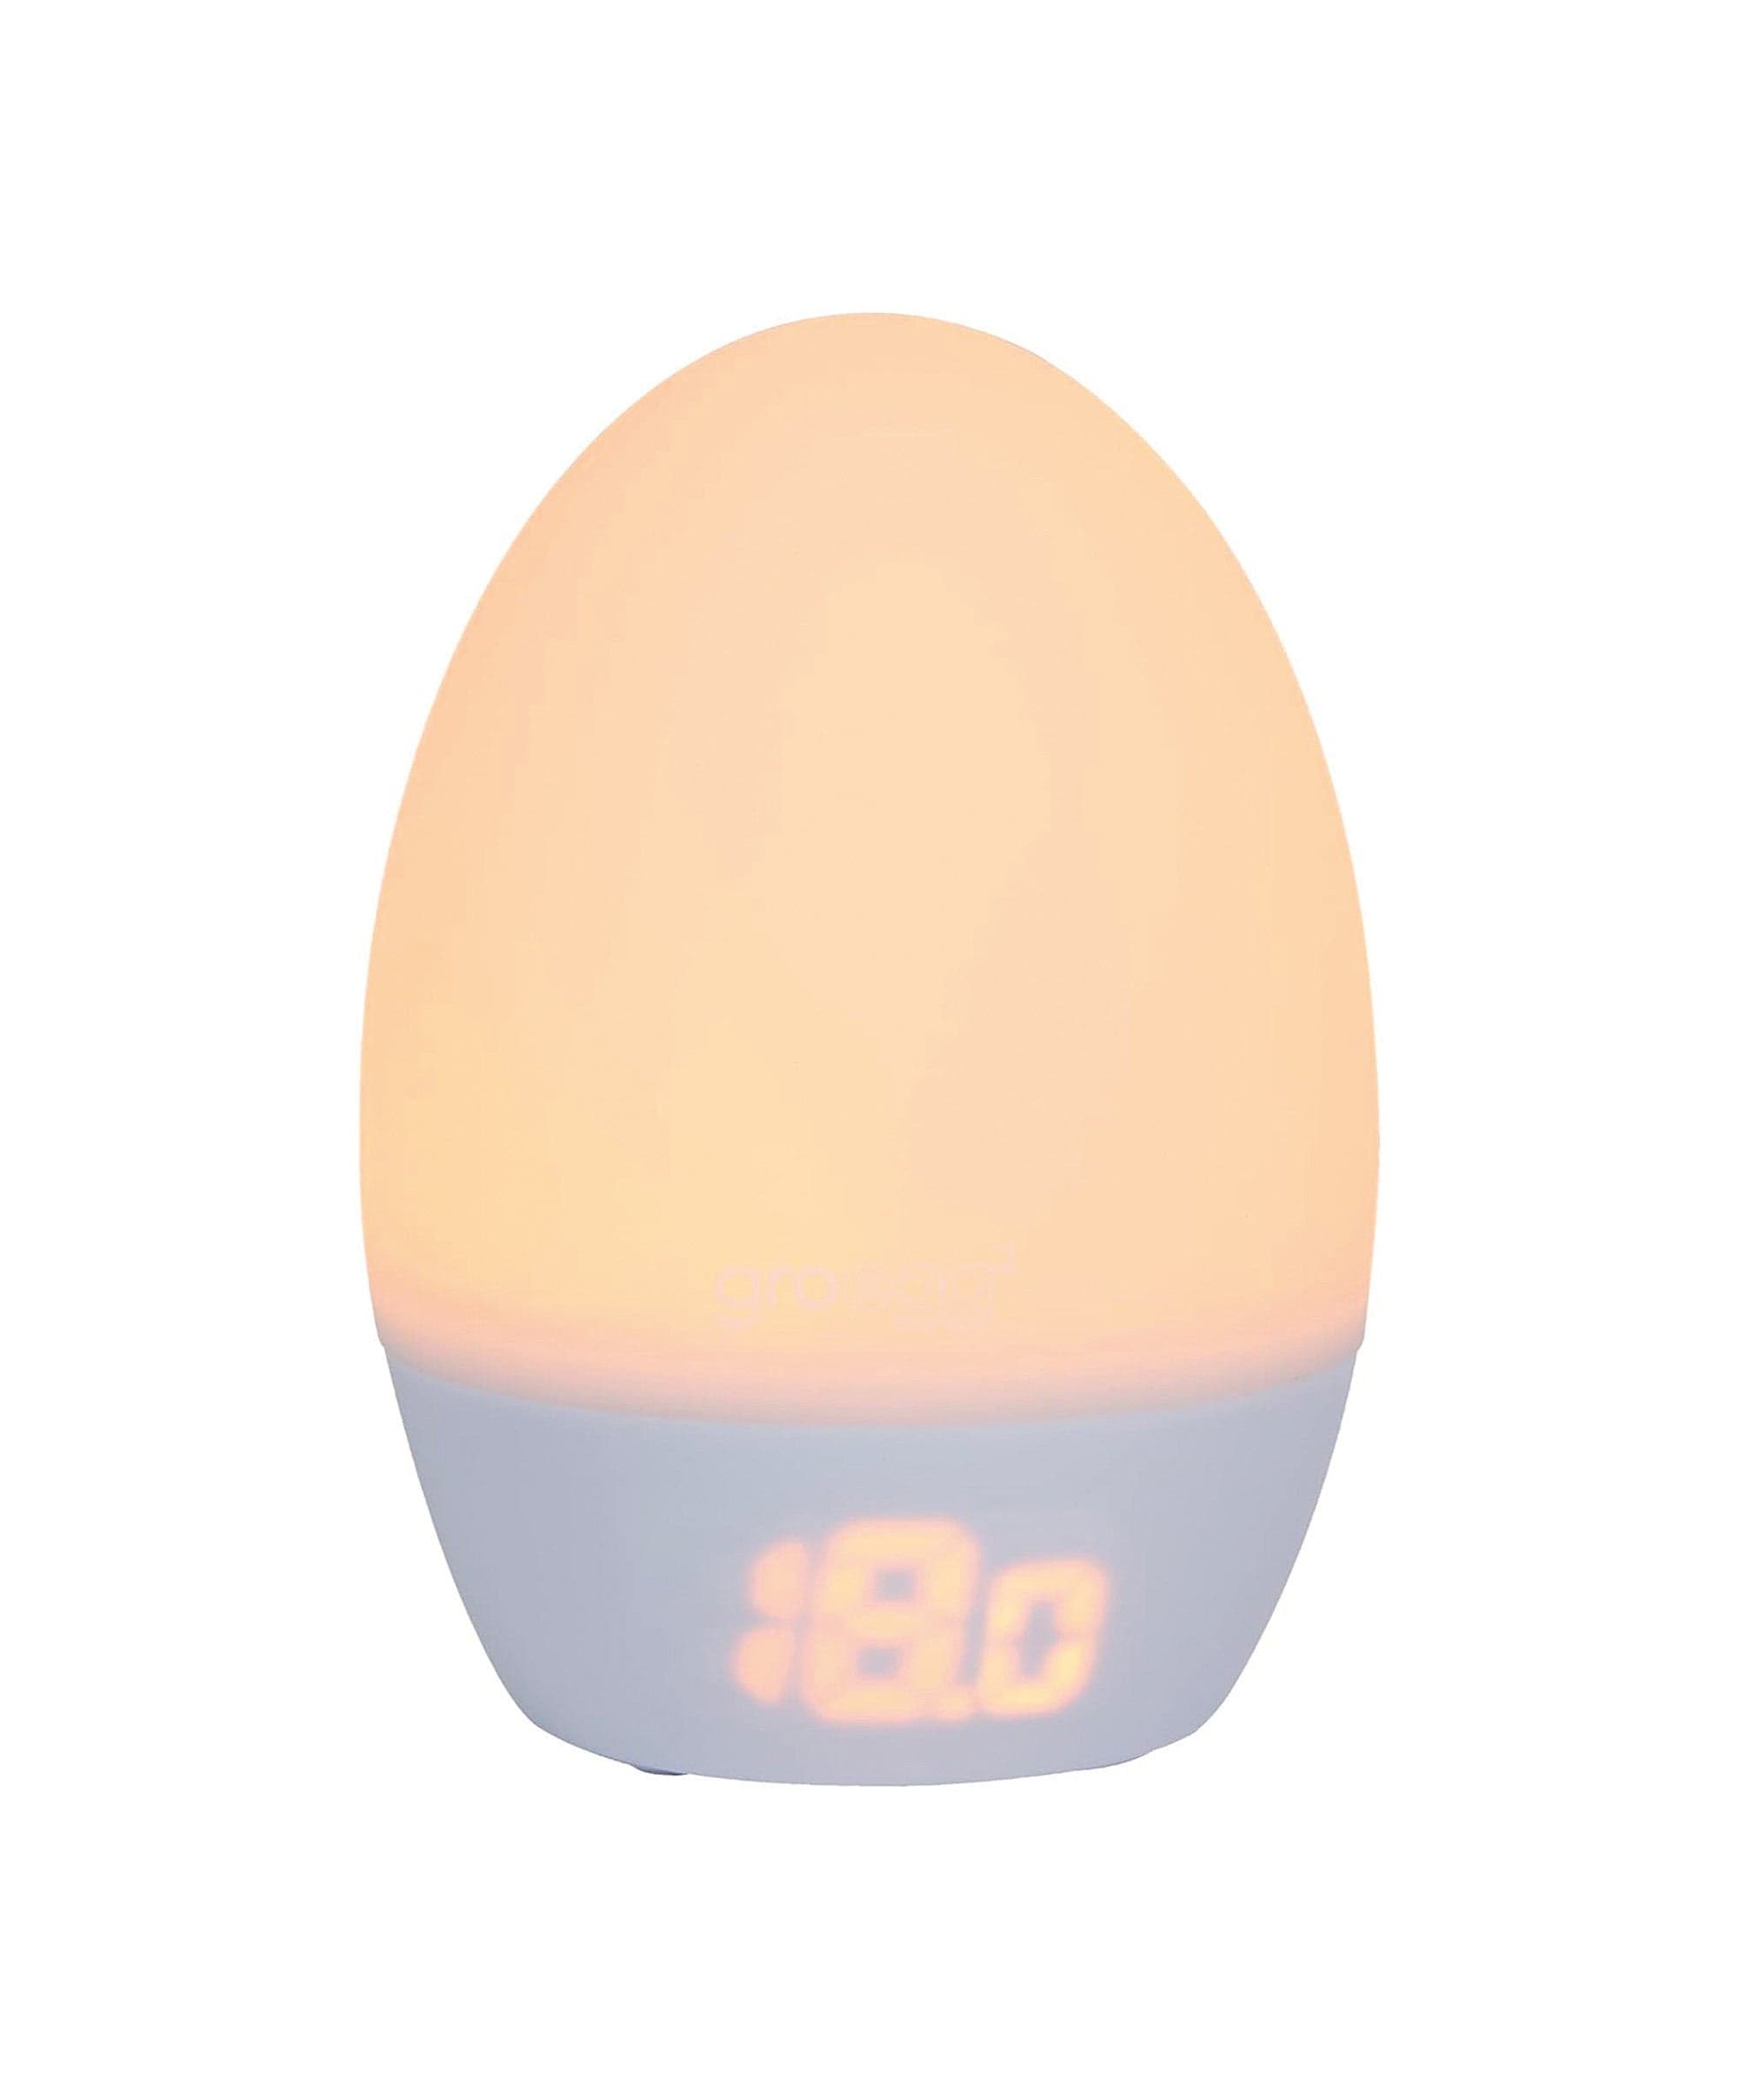 Photos - Thermometer / Barometer Tommee Tippee Gro Egg 2 Nursery Room Thermometer & Night Light - White 000 